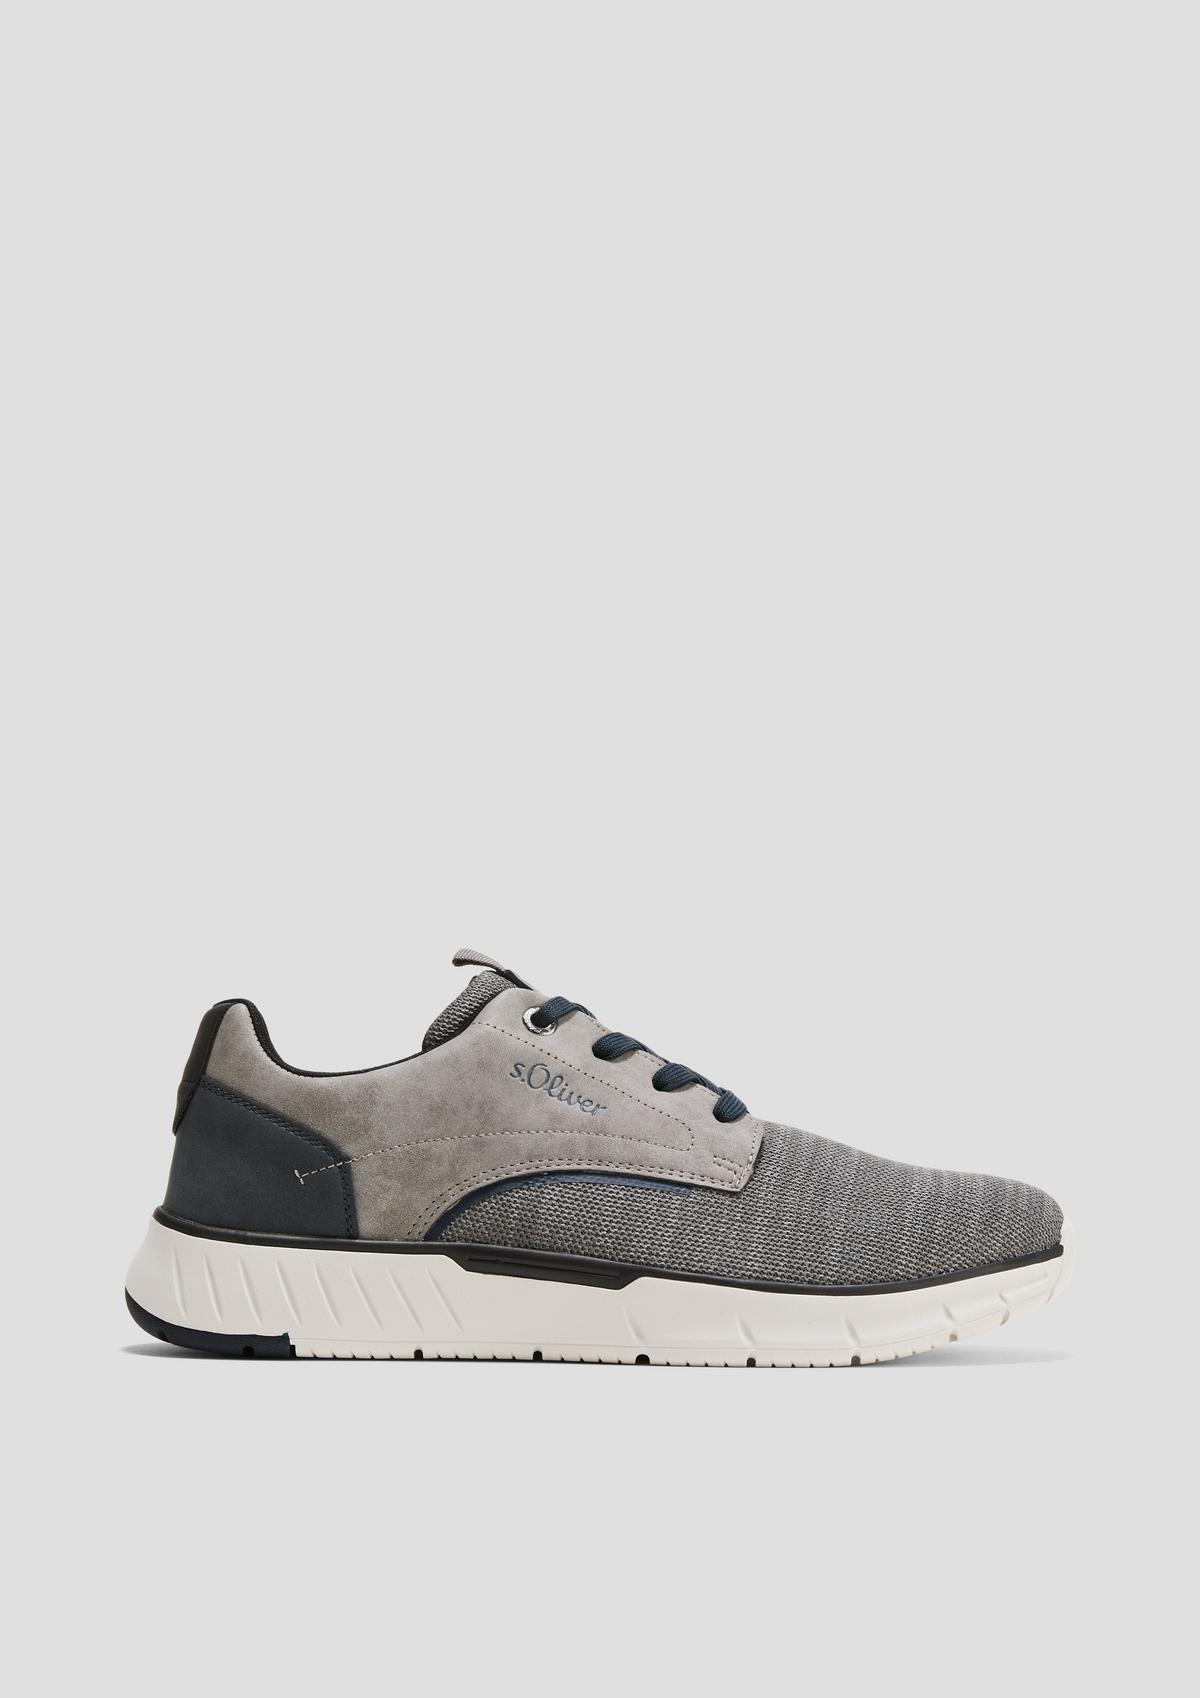 s.Oliver Sneaker im Materialmix